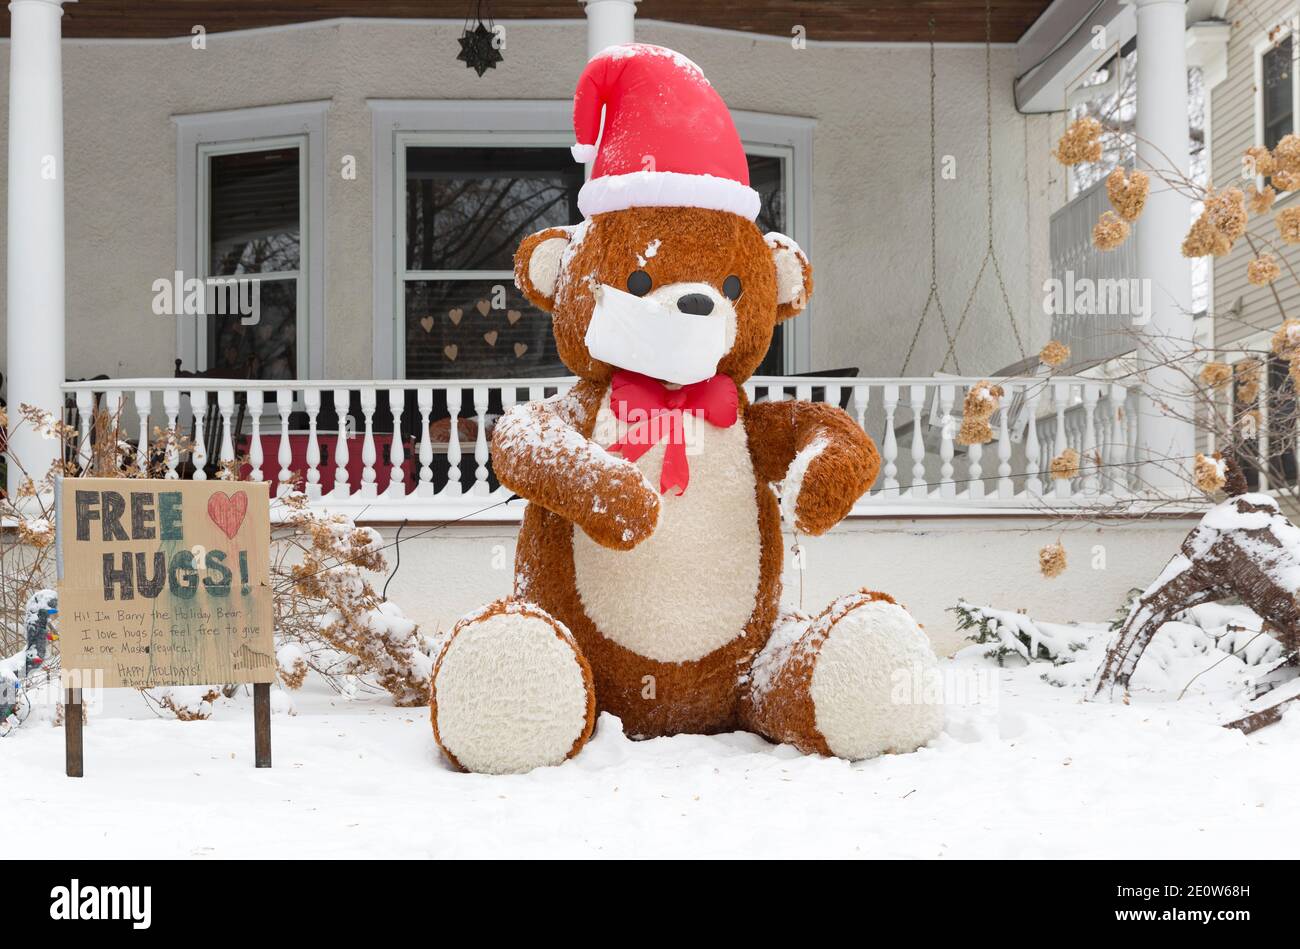 A Christmas yard display with a large teddy bear advertising free hugs during the Covid-19 pandemic of 2020 Stock Photo